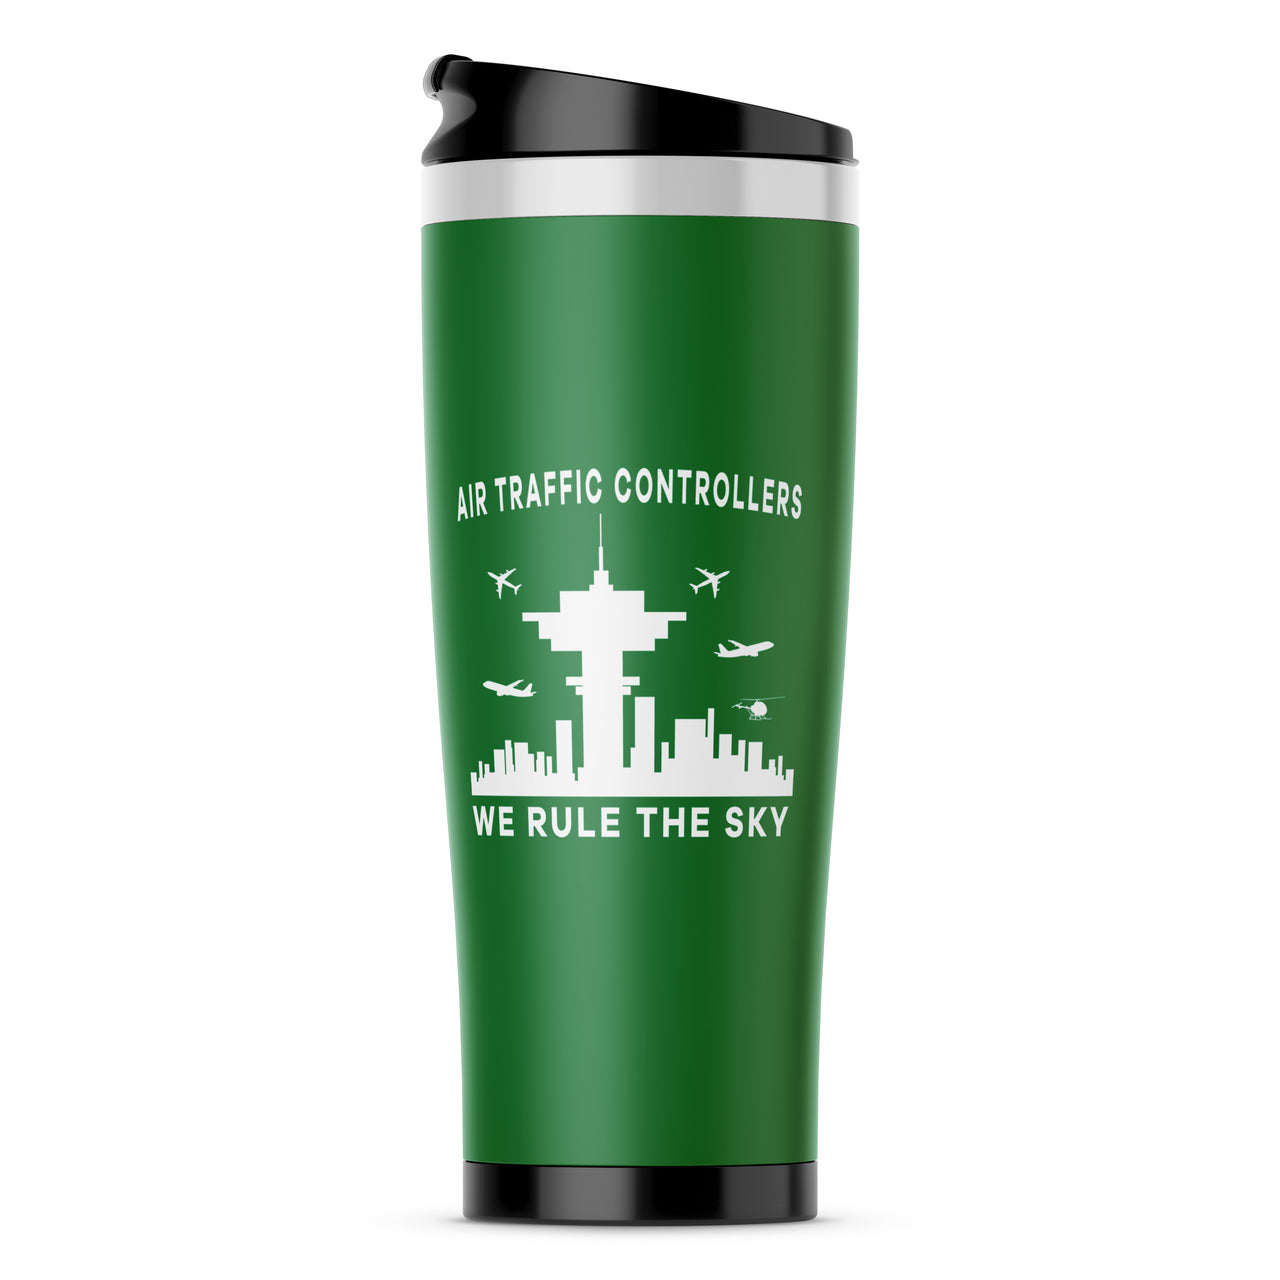 Air Traffic Controllers - We Rule The Sky Designed Travel Mugs